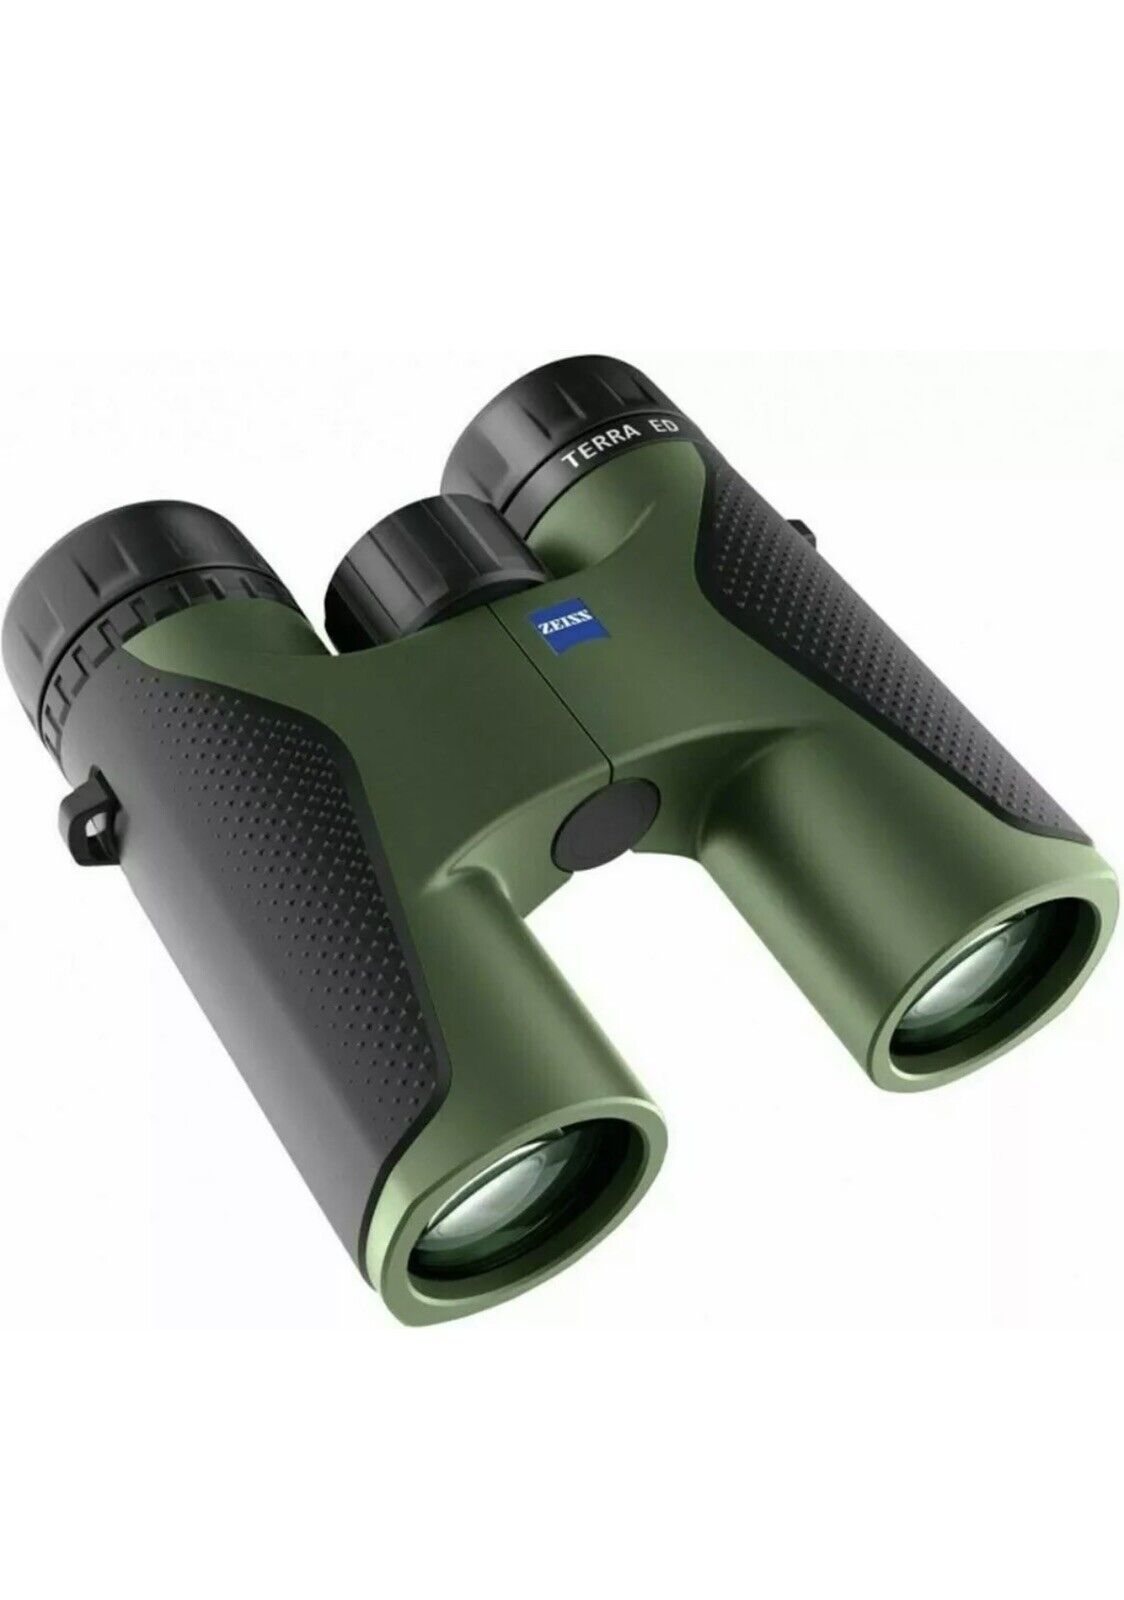 Zeiss 10 x 32mm Terra ED Binocular - Black And Green With Case And Comfort Strap